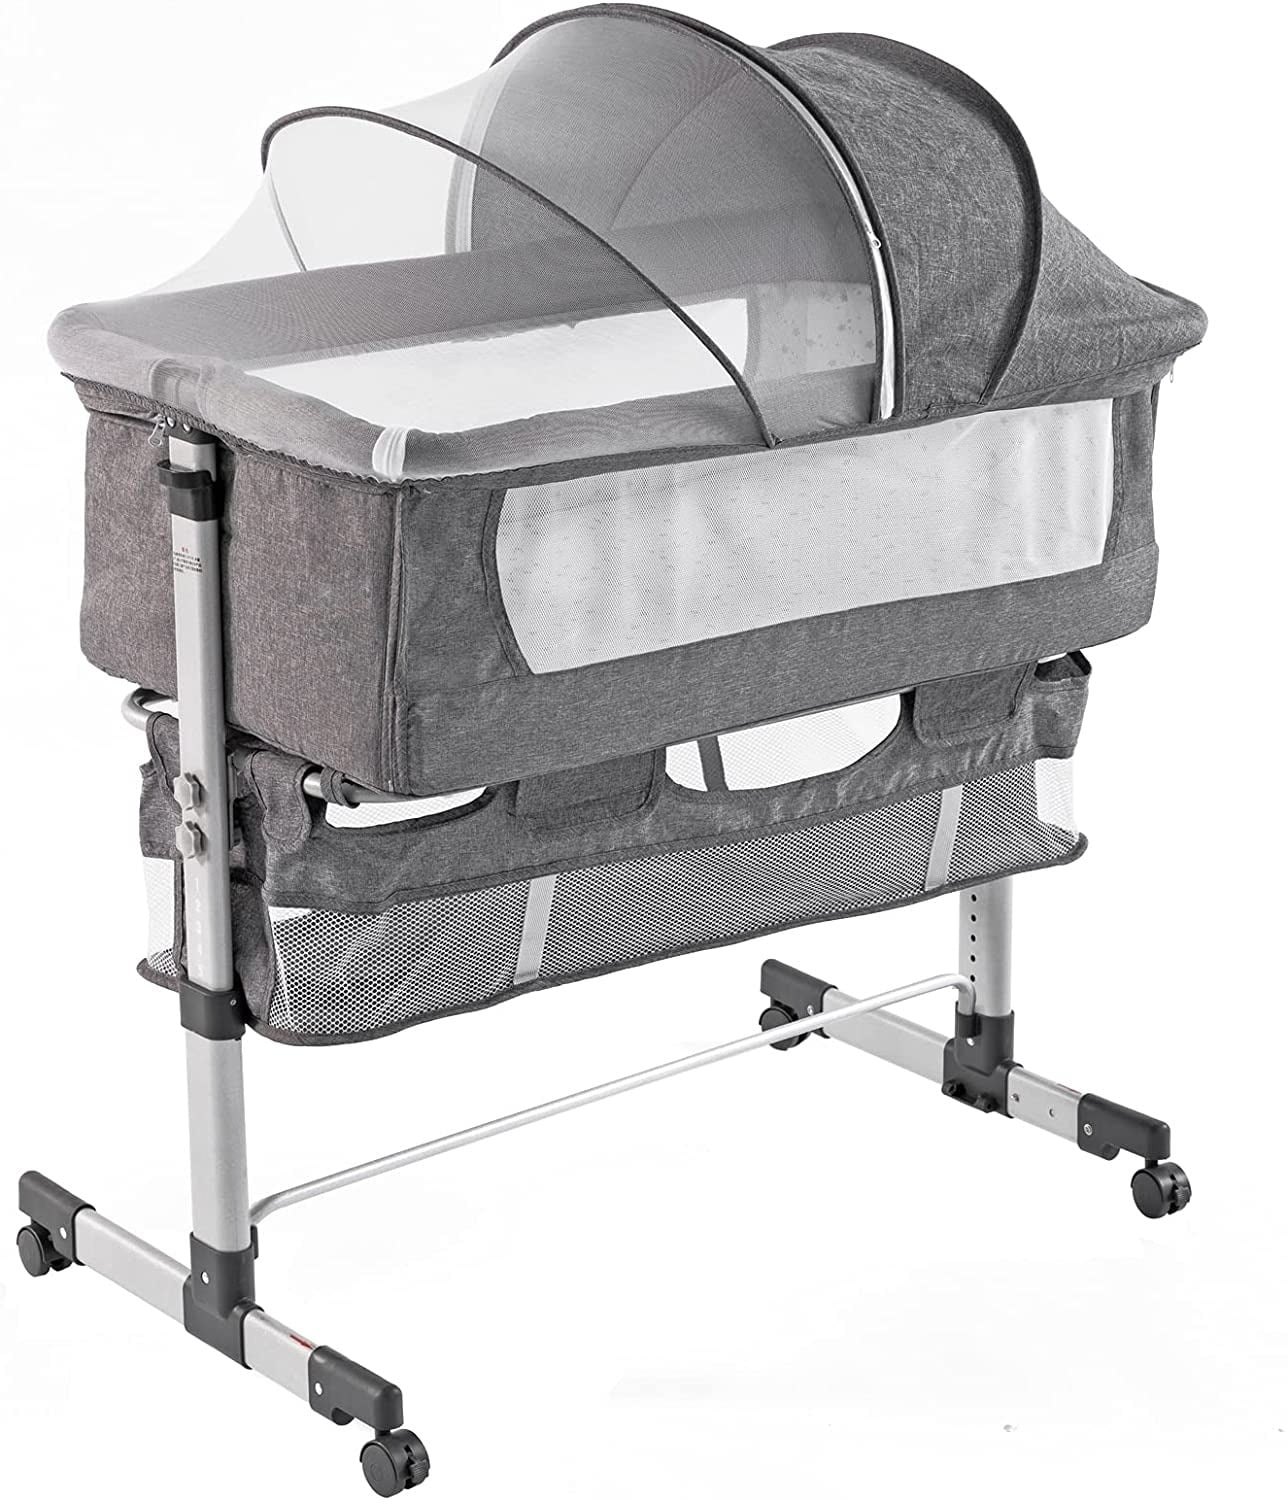 Grey Easy Folding Sleeper with Mattress Included Lamberia 3 in 1 Bassinet for Baby Height Adjustable Bedside Travel Crib for Newborn Infant/Baby Boy/Baby Girl 